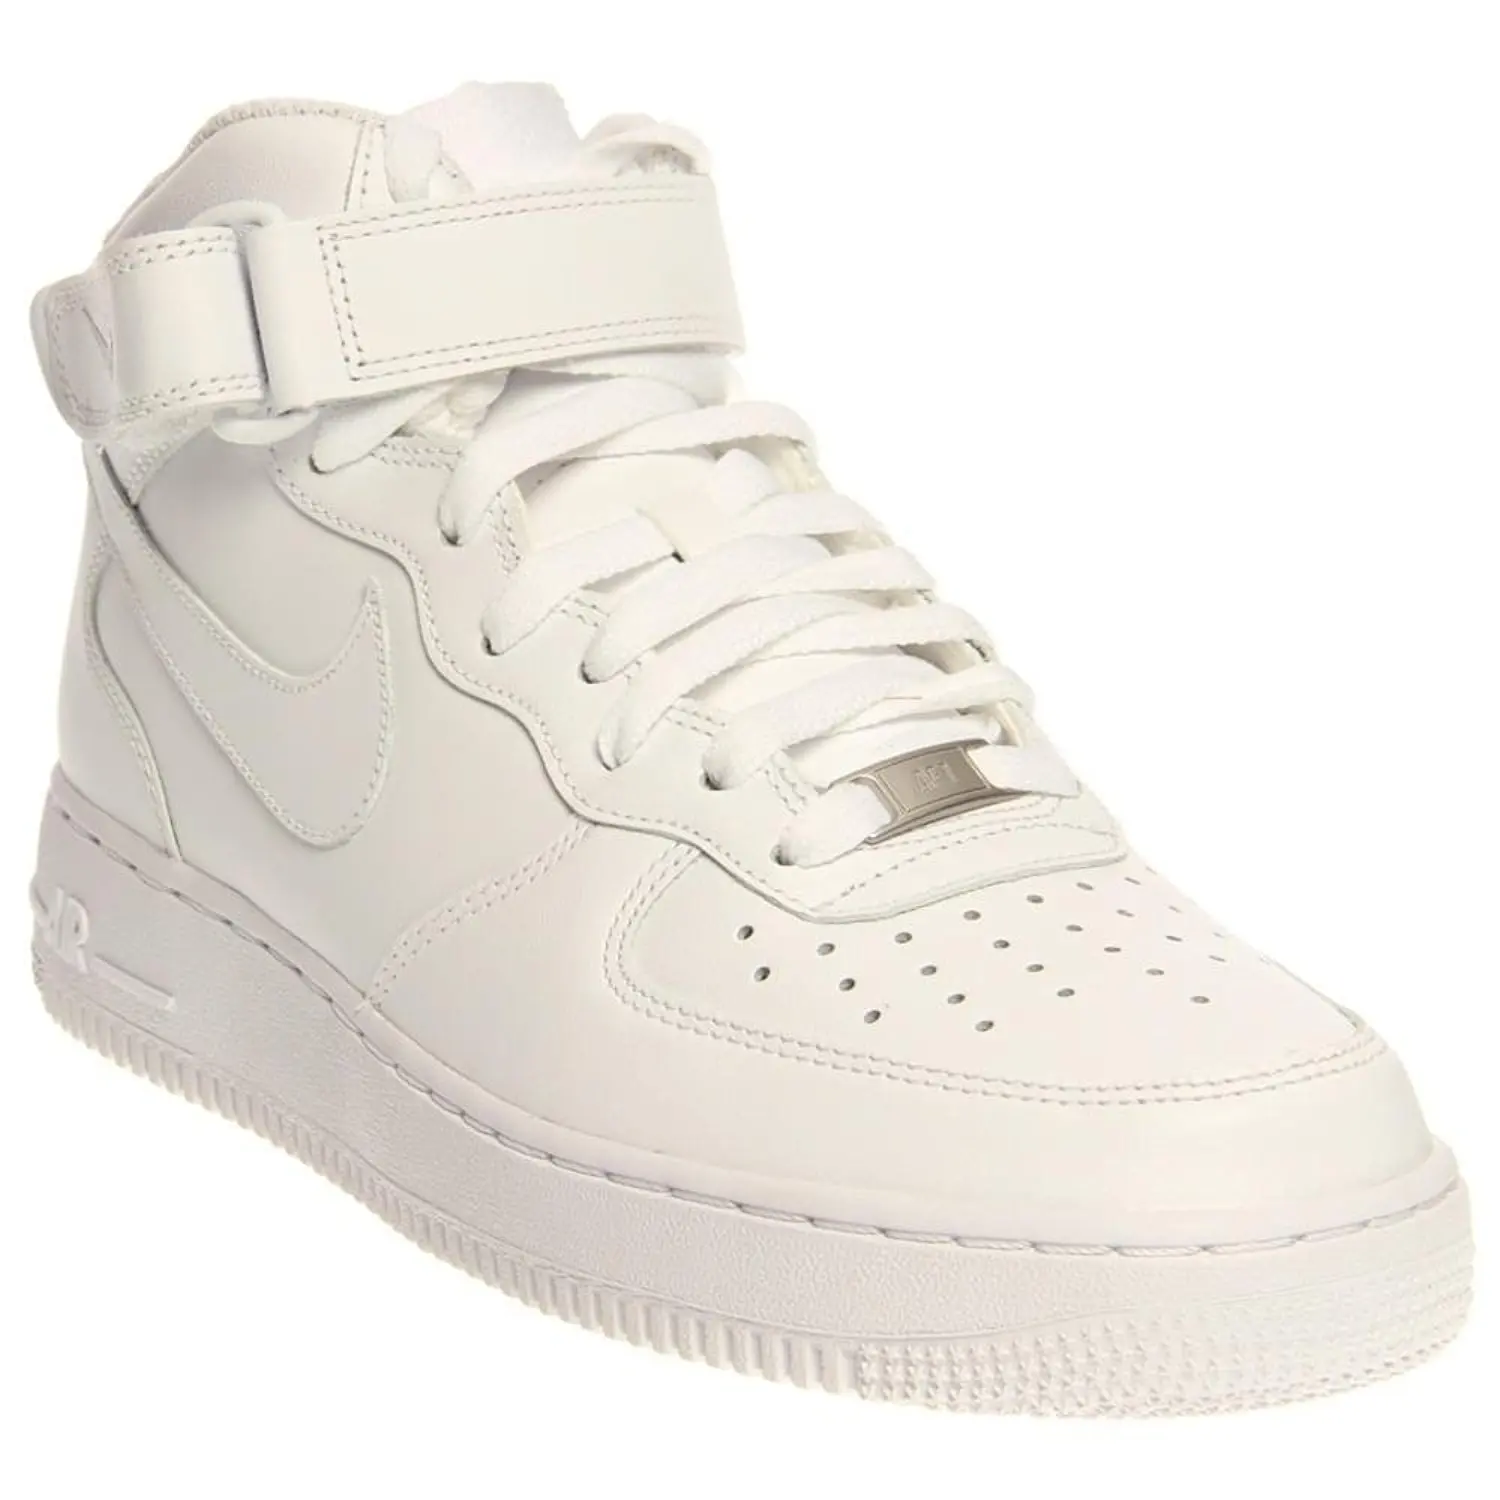 nike air force 1 size 8.5 mens